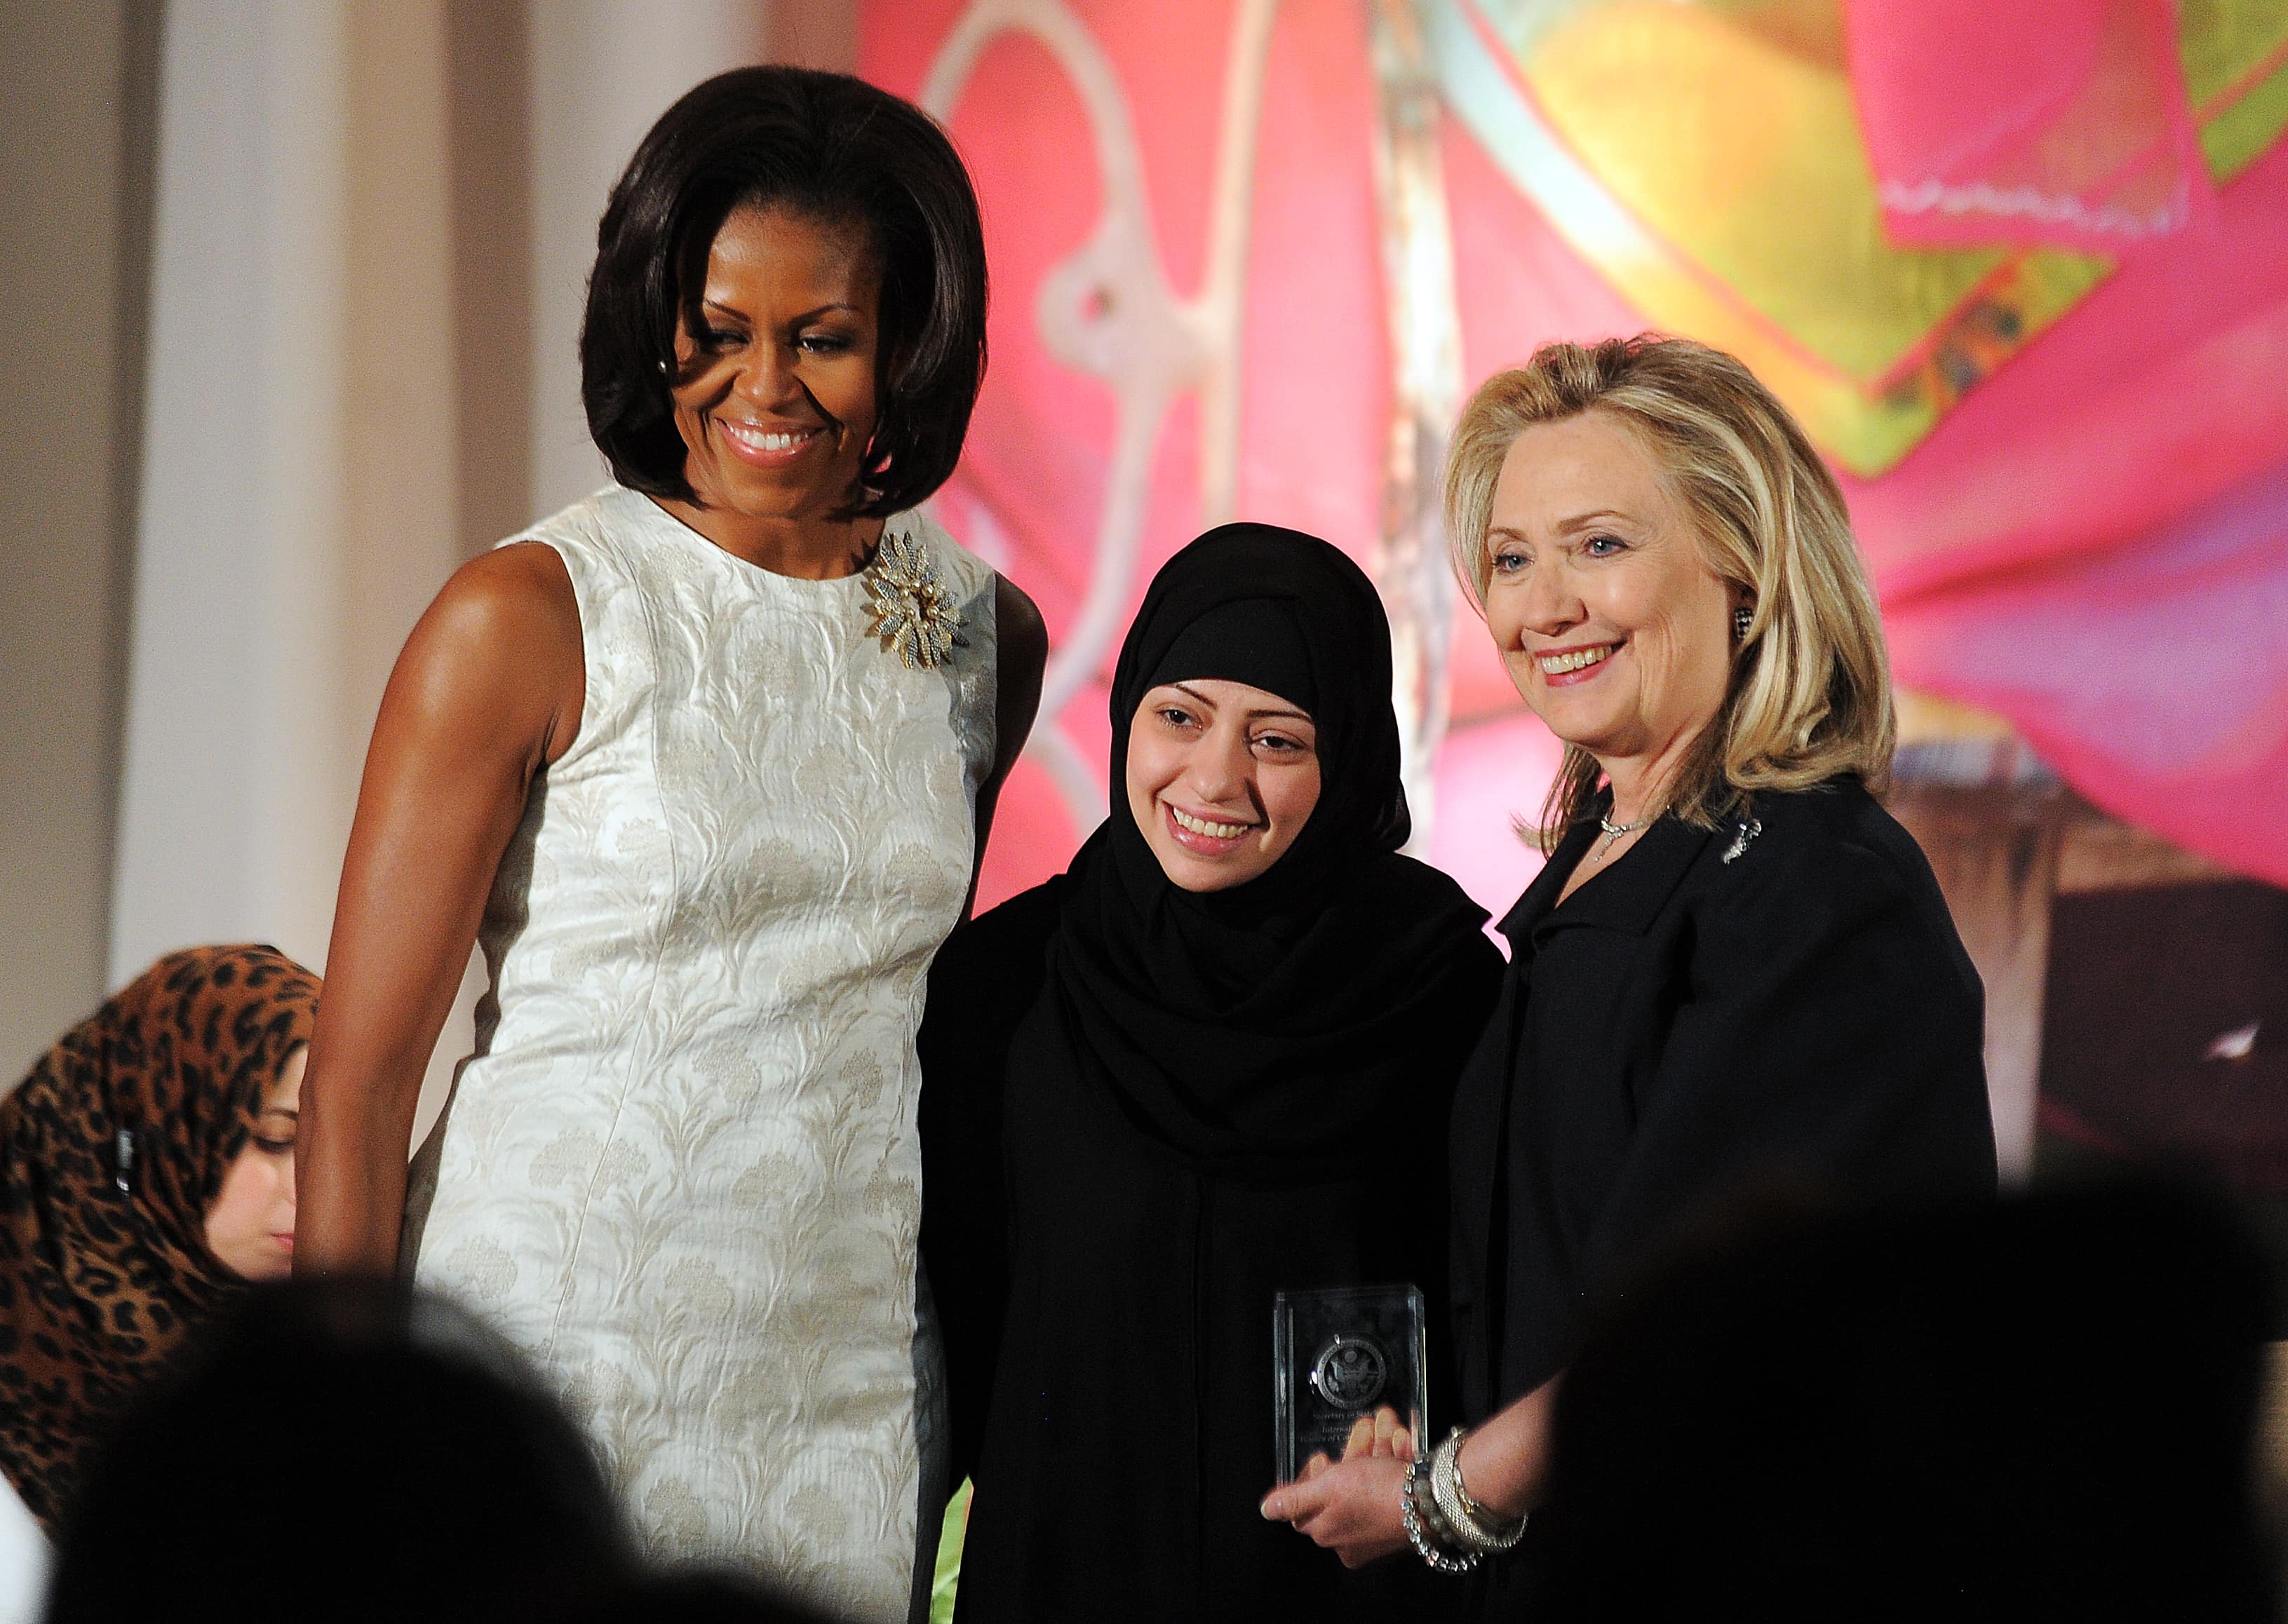 Samar Badawi receives the International Women of Courage Award from US First Lady Michelle Obama and Secretary of State Hillary Clinton, Washington DC, United States, 8 March 2012, JEWEL SAMAD/AFP/Getty Images